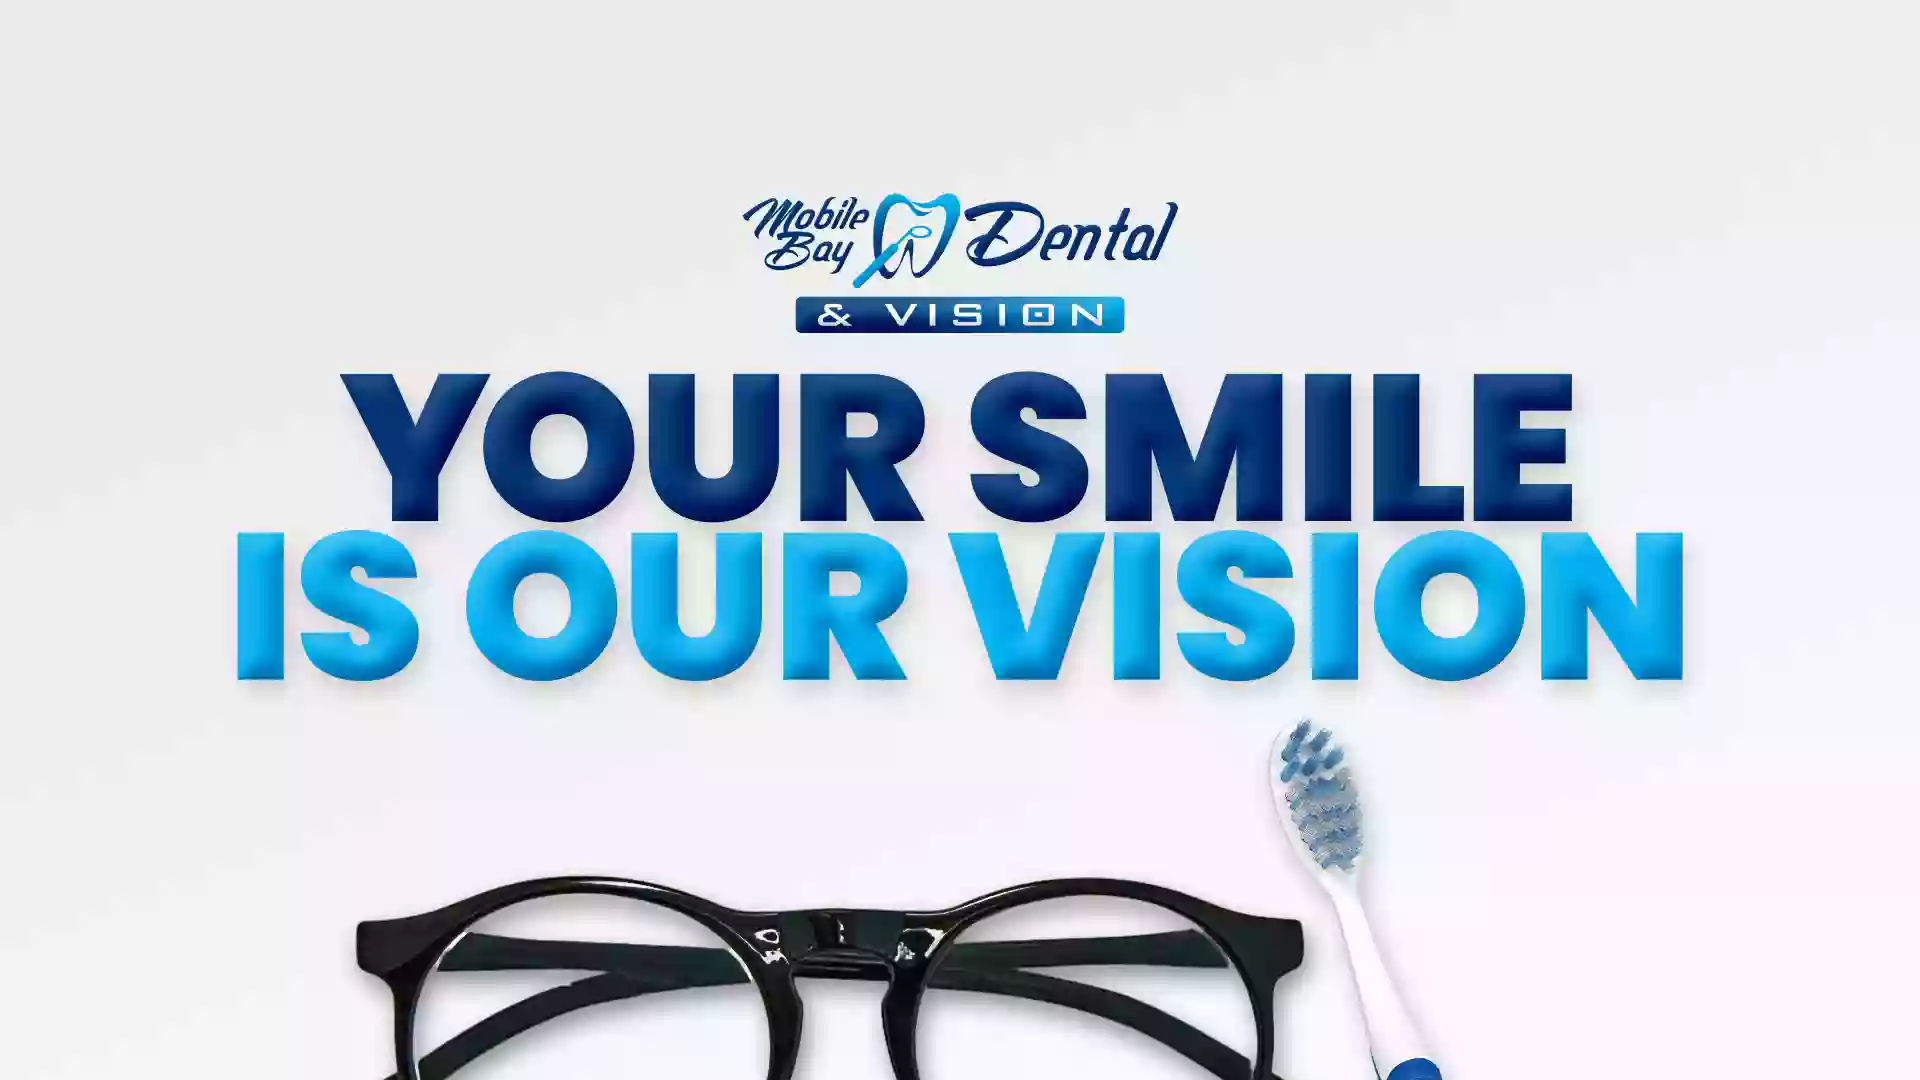 Mobile Bay Dental and Vision - The Shoppes at Bel Air